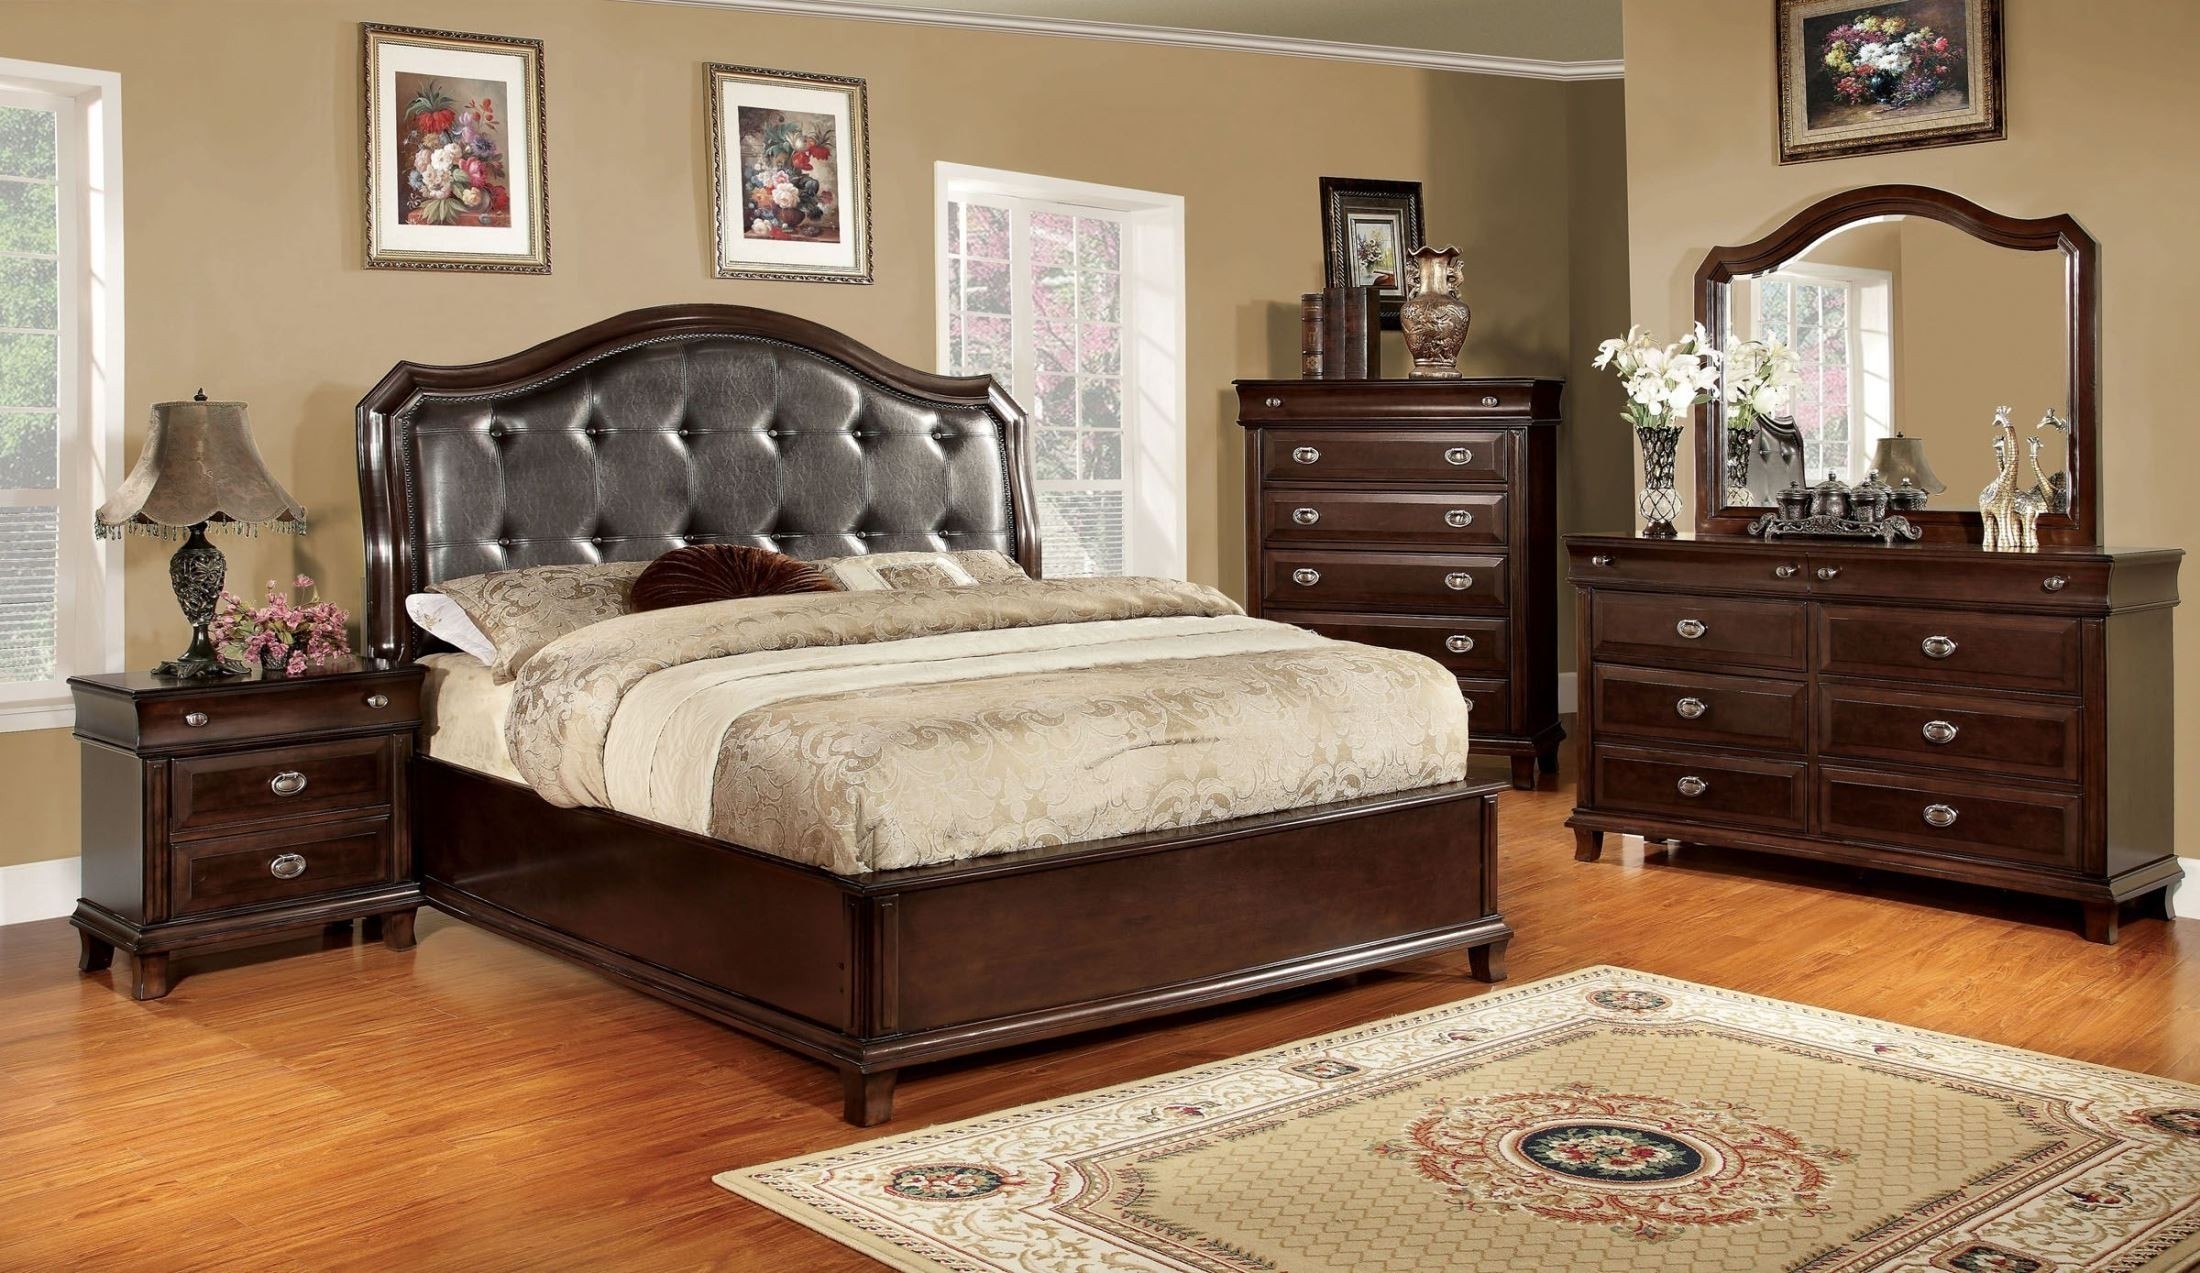 Arden brown cherry faux leather bedroom set from furniture